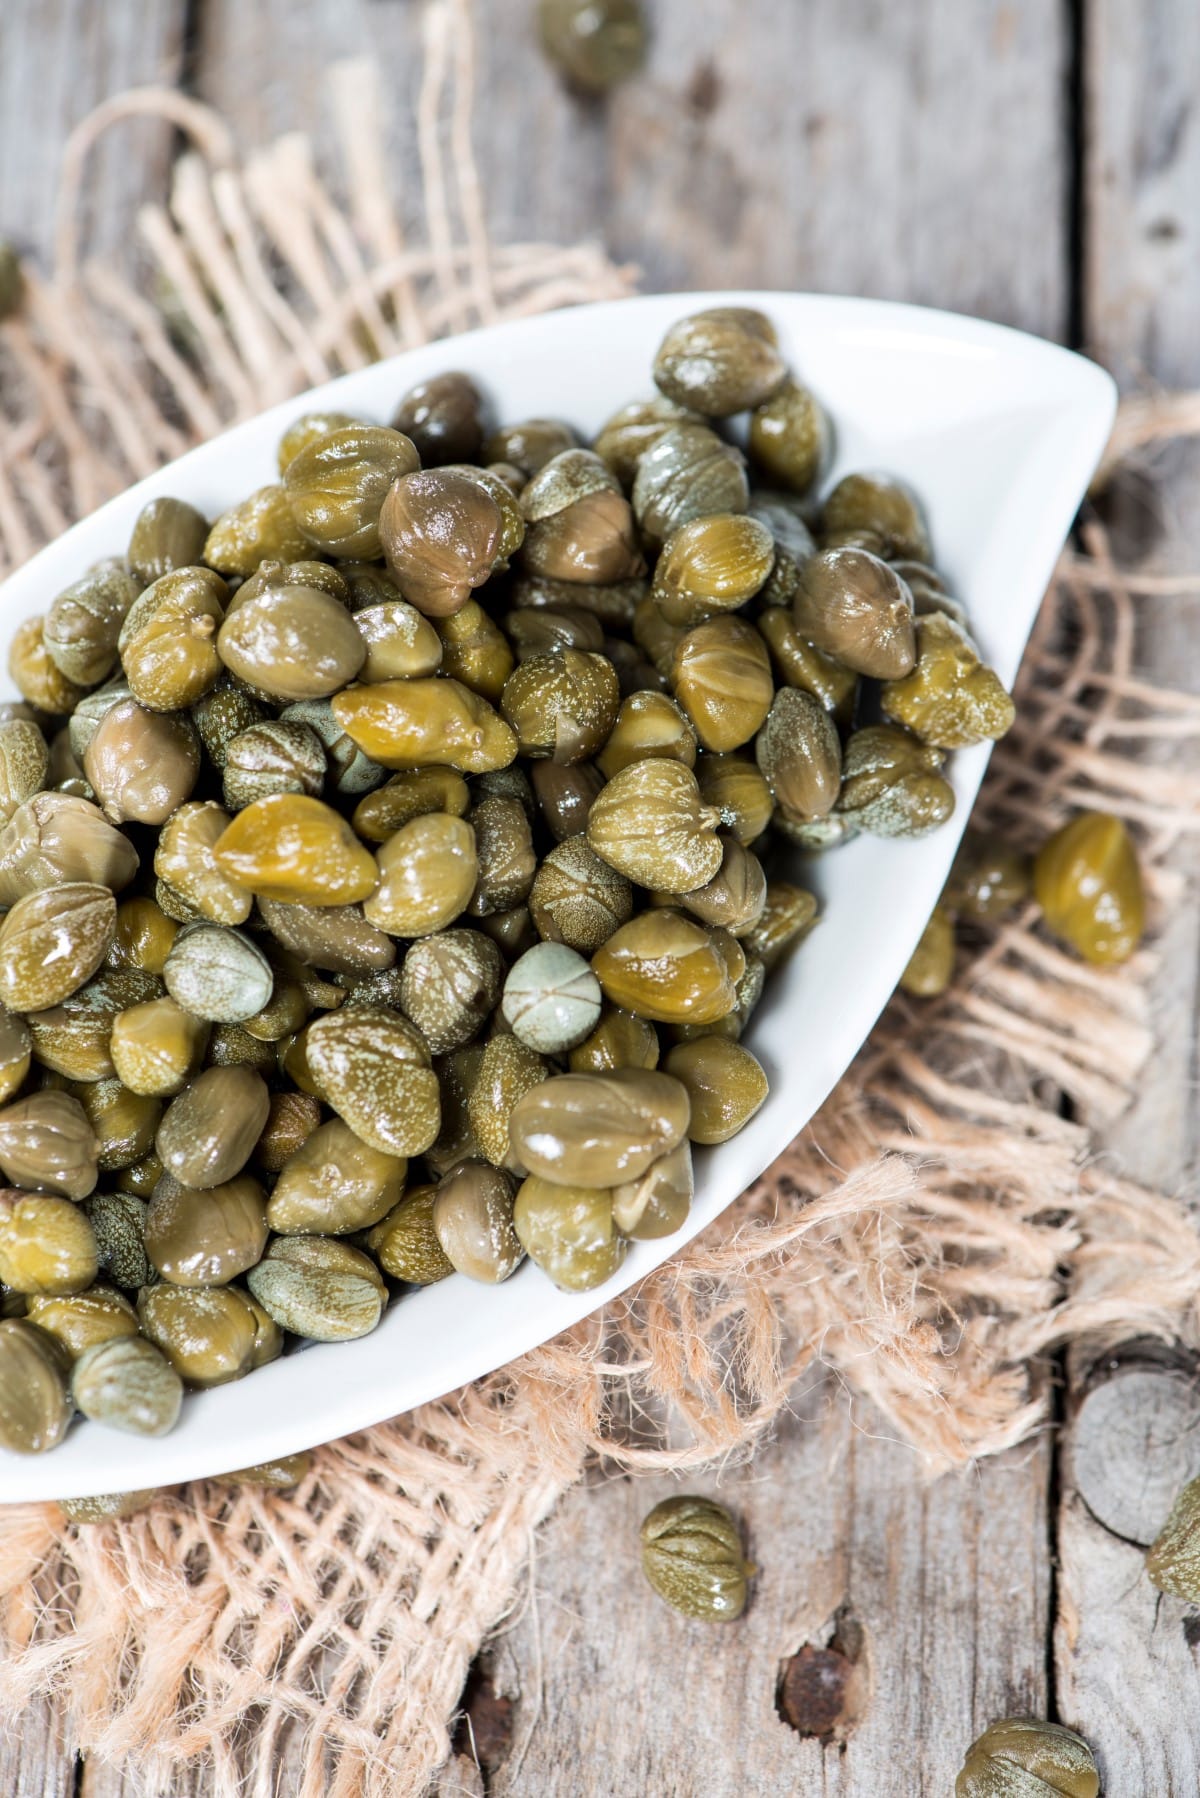 Heap of preserved Capers on vintage background.